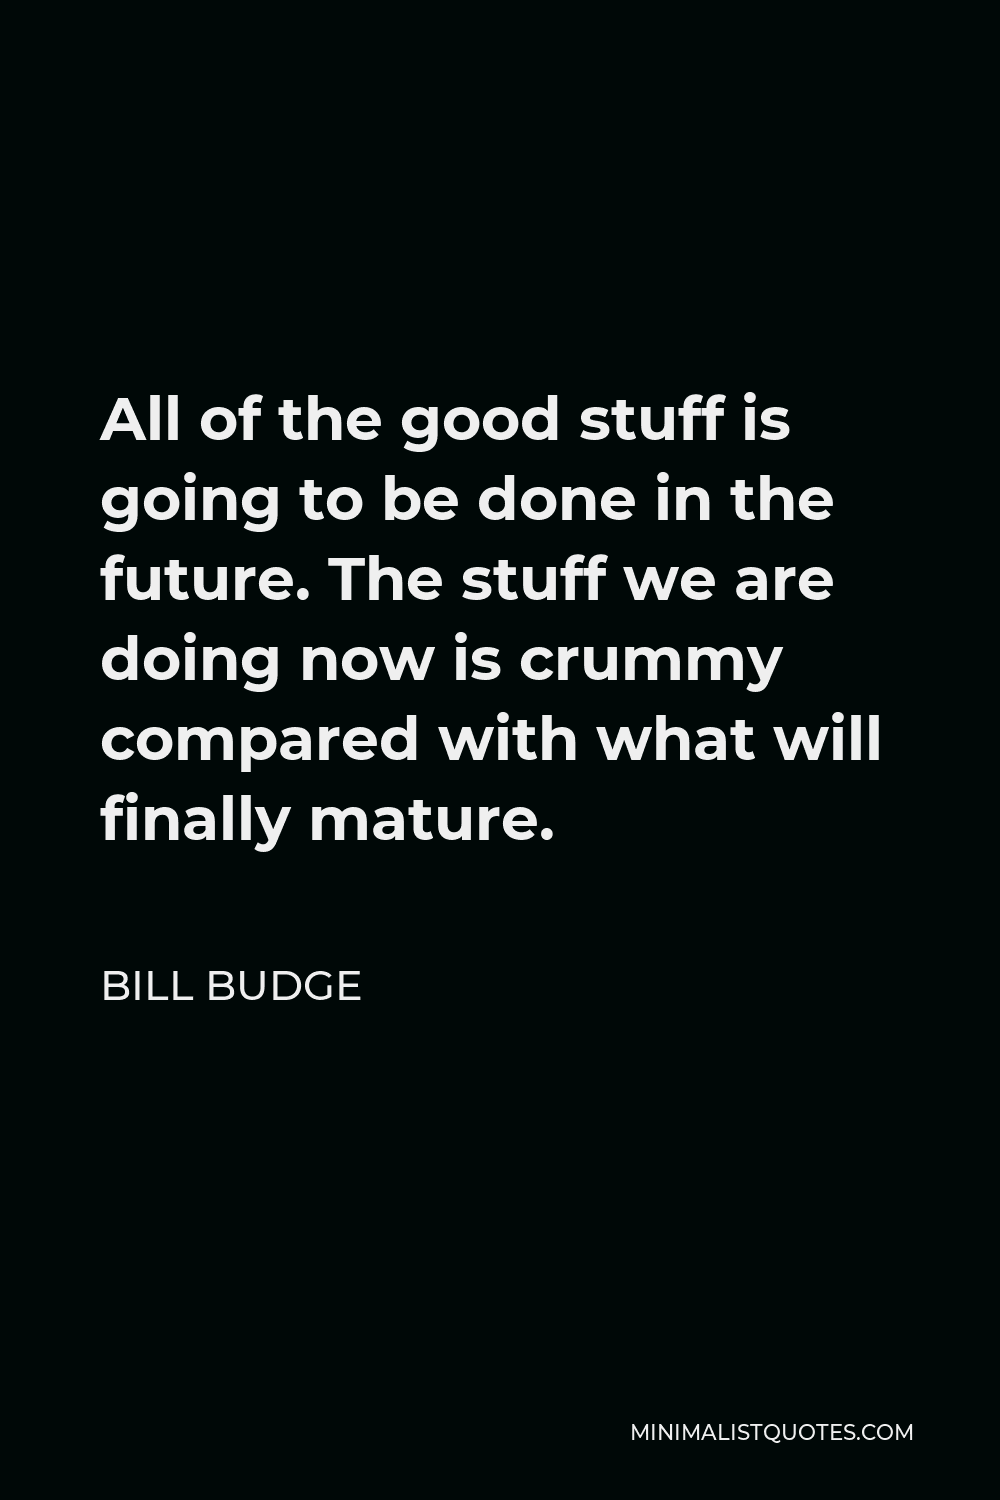 Bill Budge Quote - All of the good stuff is going to be done in the future. The stuff we are doing now is crummy compared with what will finally mature.